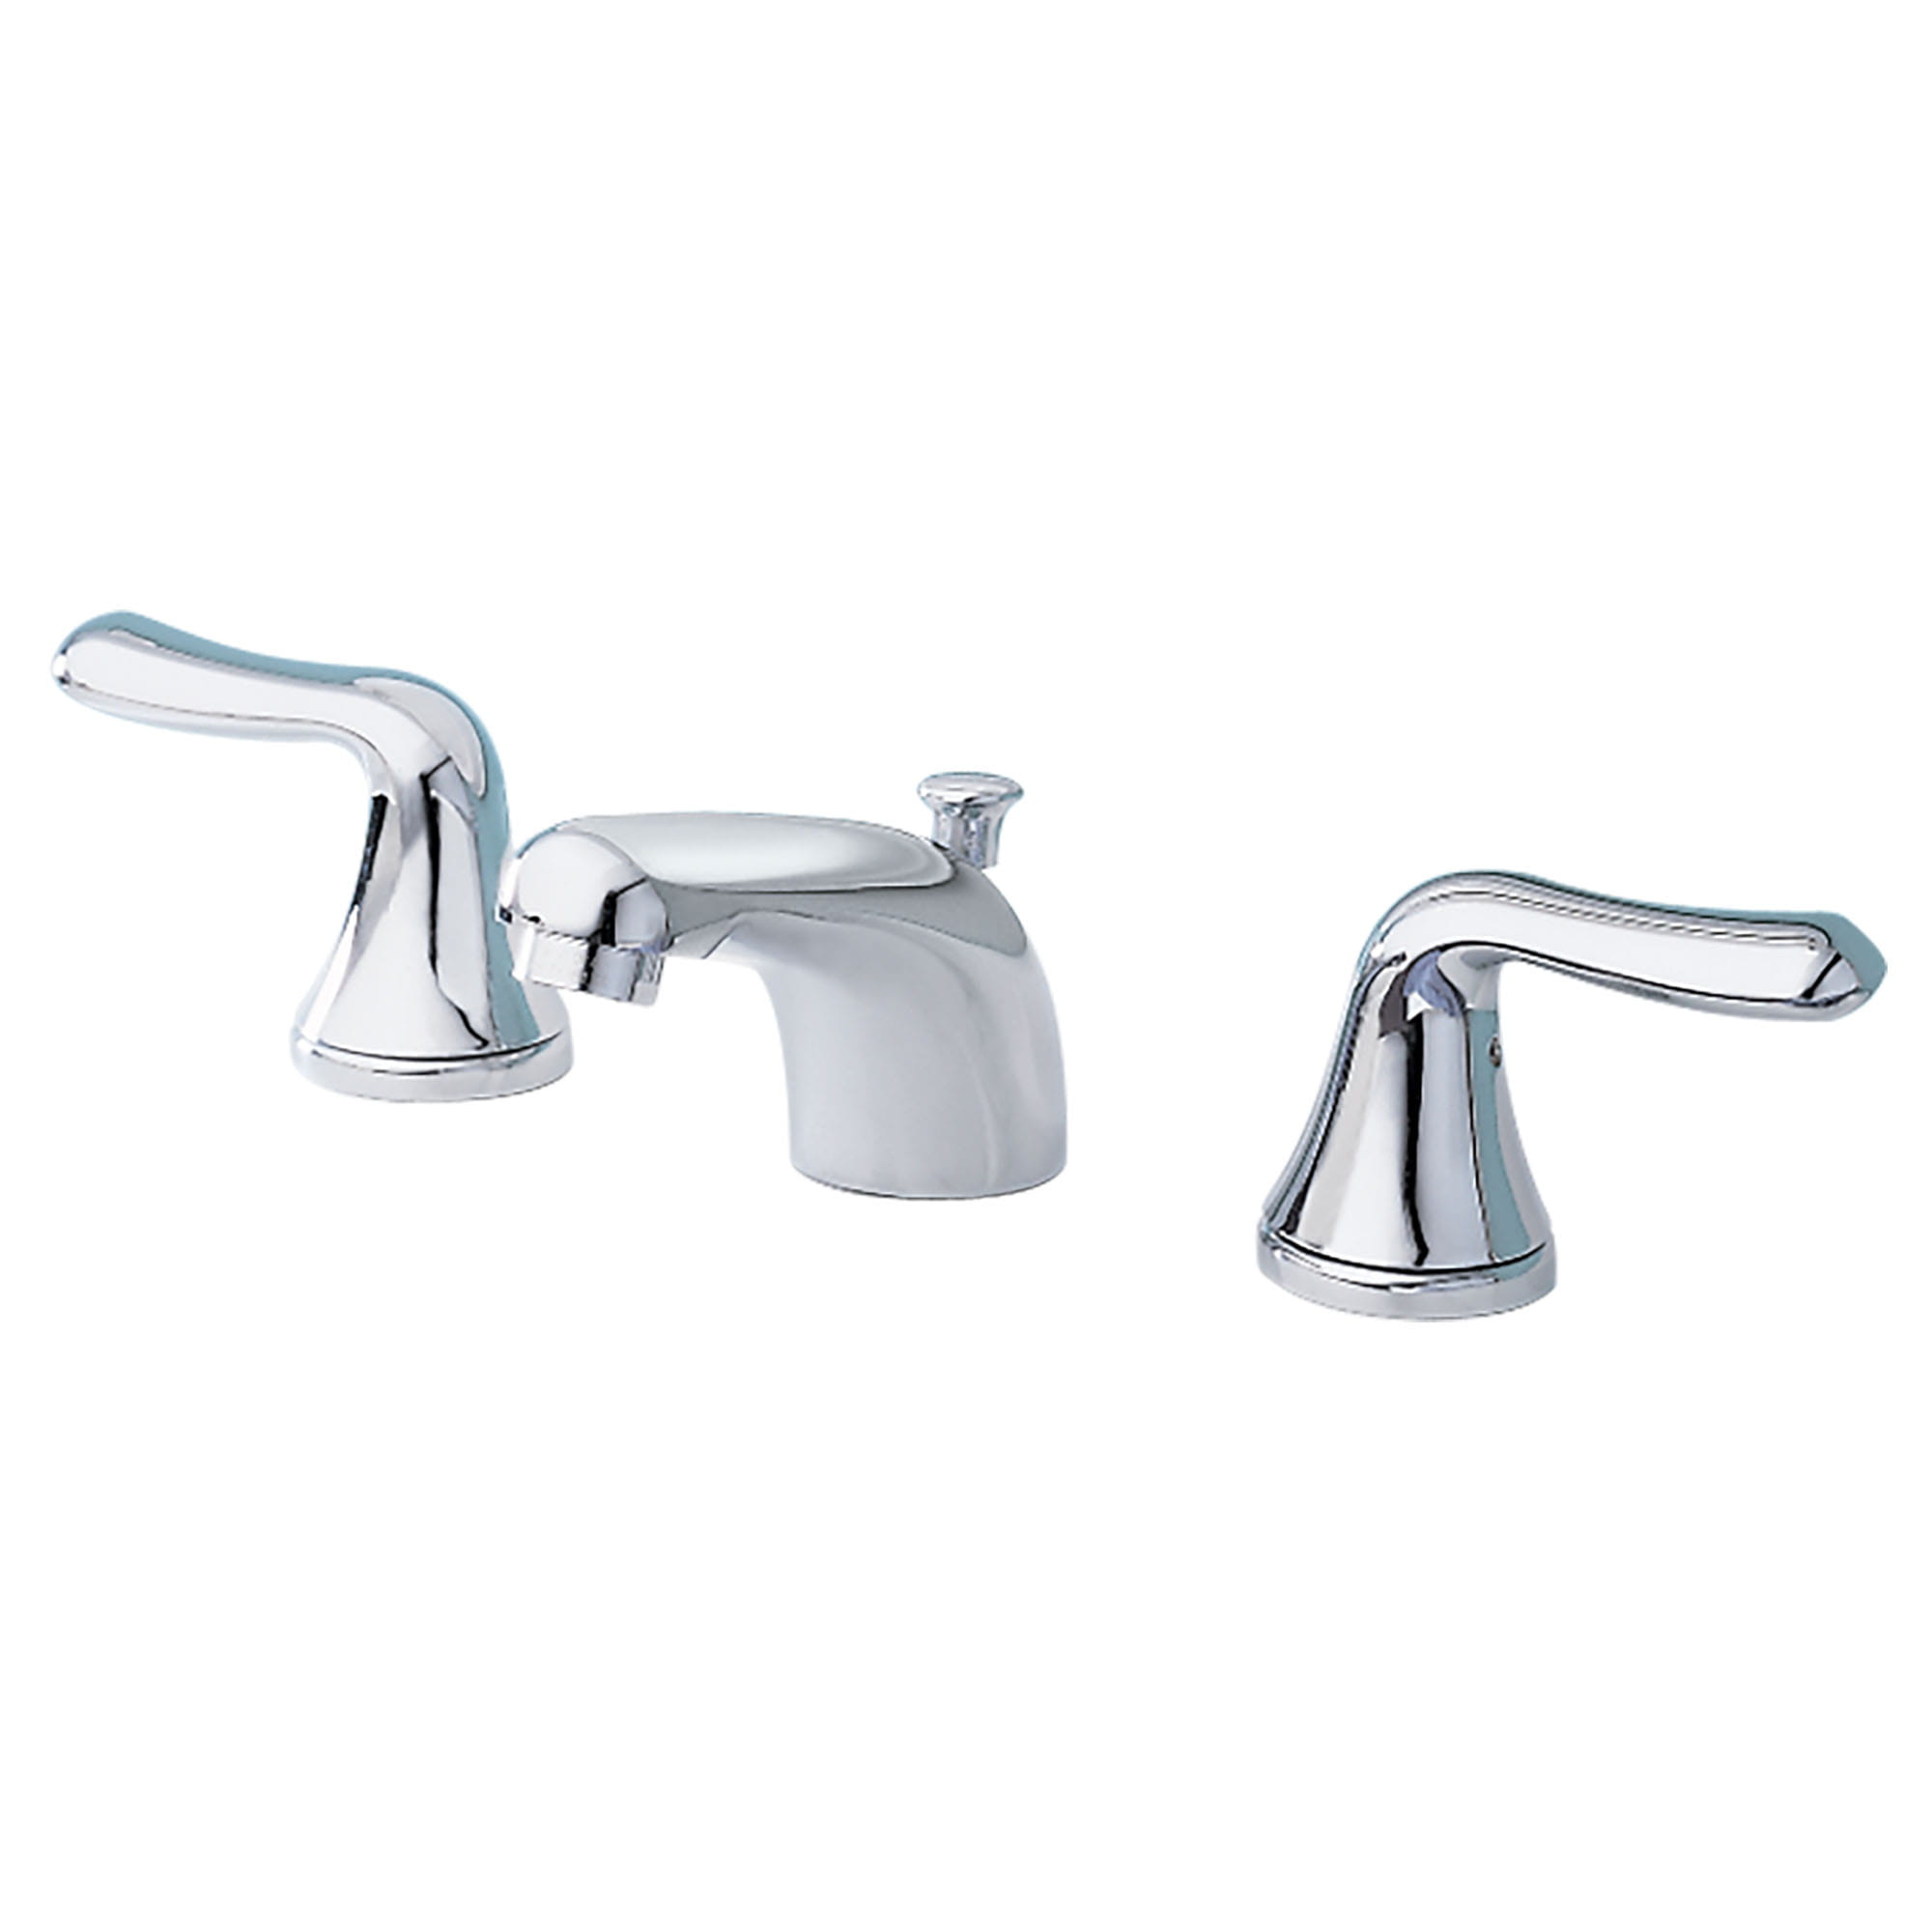 Colony Soft 8 Inch Widespread 2 Handle Bathroom Faucet 12 gpm 45 L min With Lever Handles CHROME